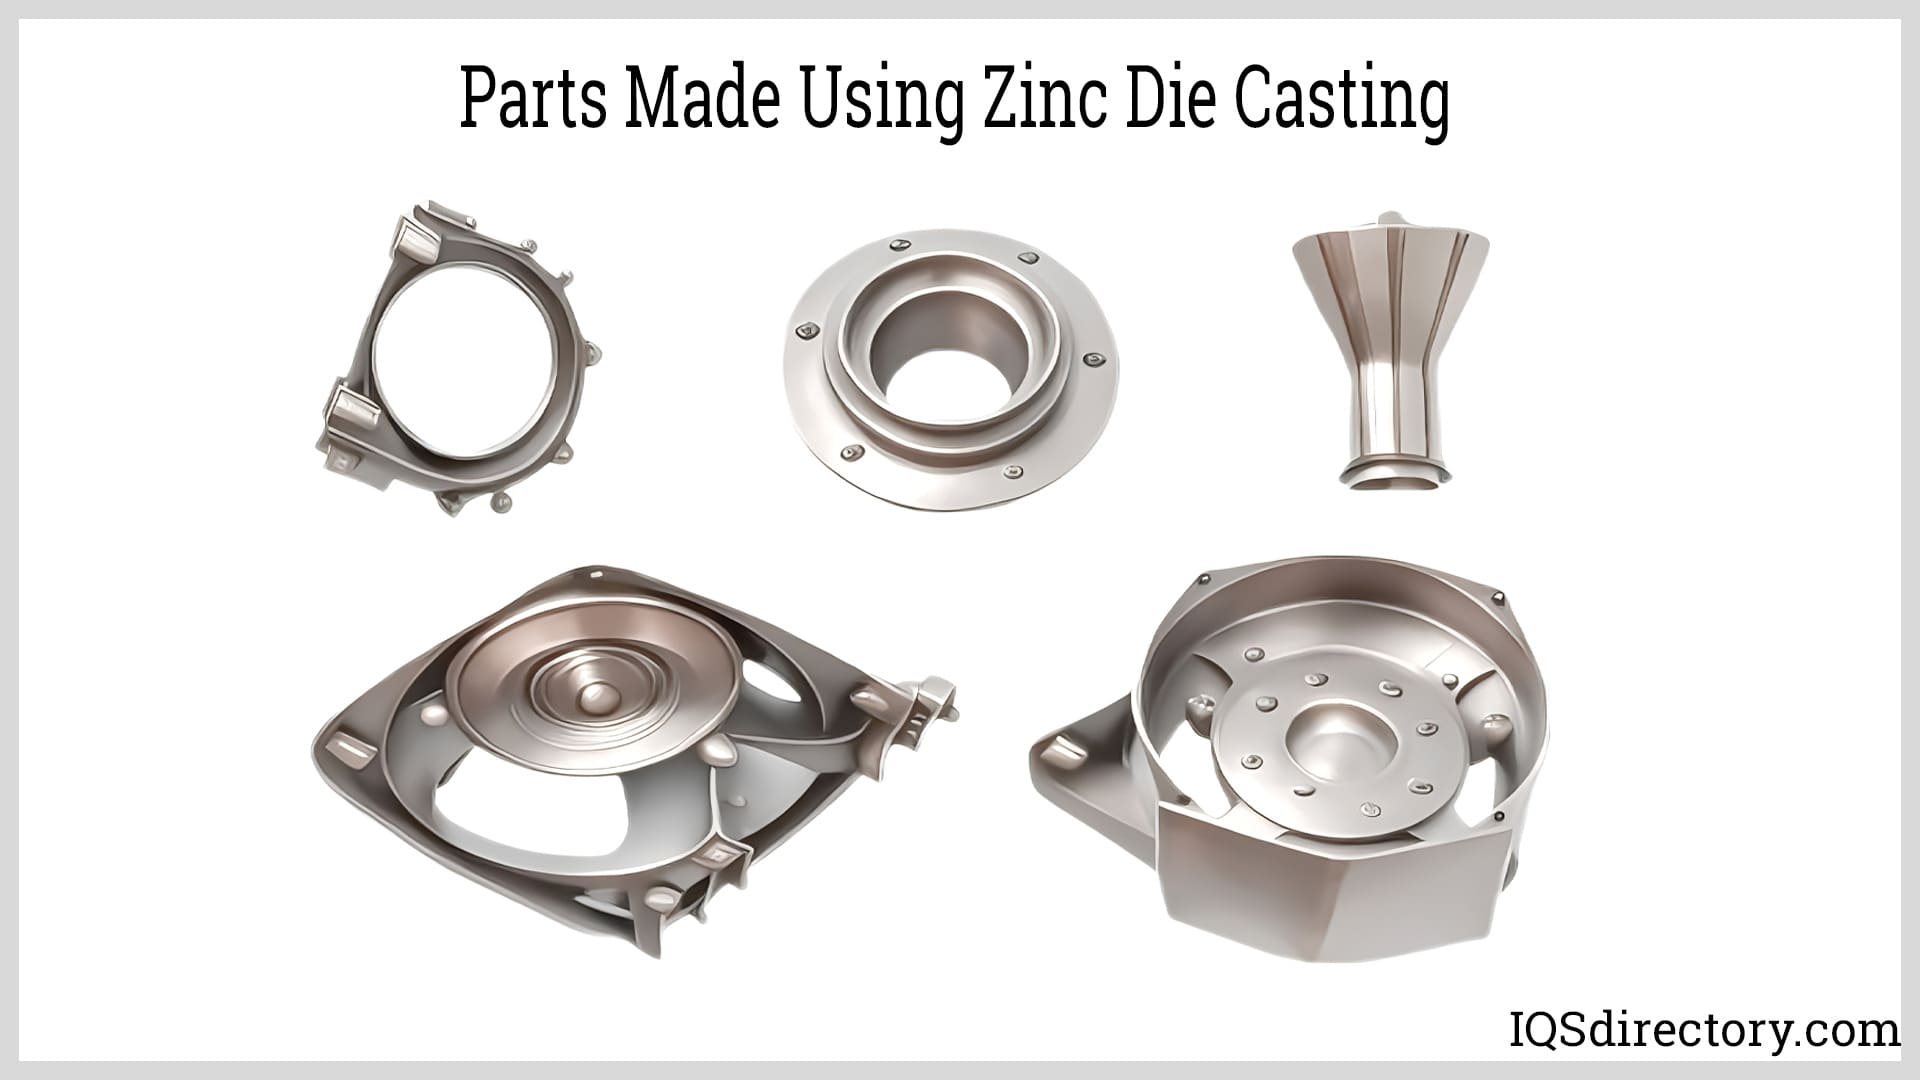 Sand Casting Parts as a Cost-Effective Solution – ZHY Casting